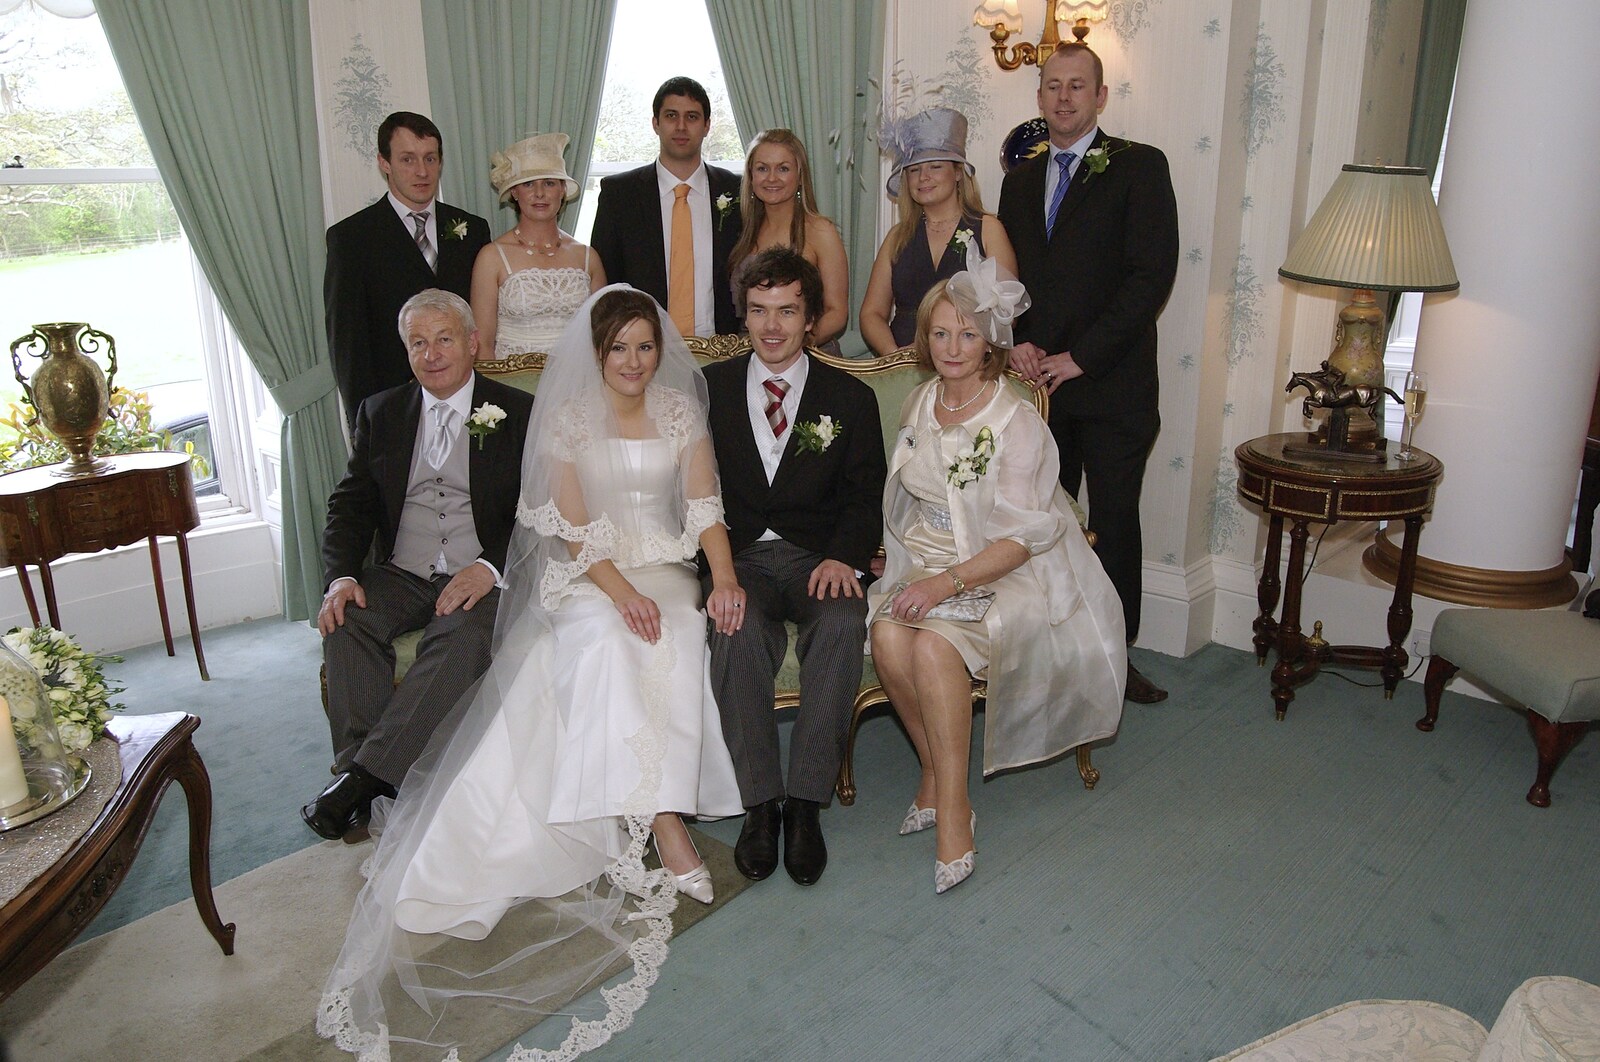 A classic wedding photo from Paul and Jenny's Wedding, Tralee, County Kerry, Ireland - 3rd May 2008